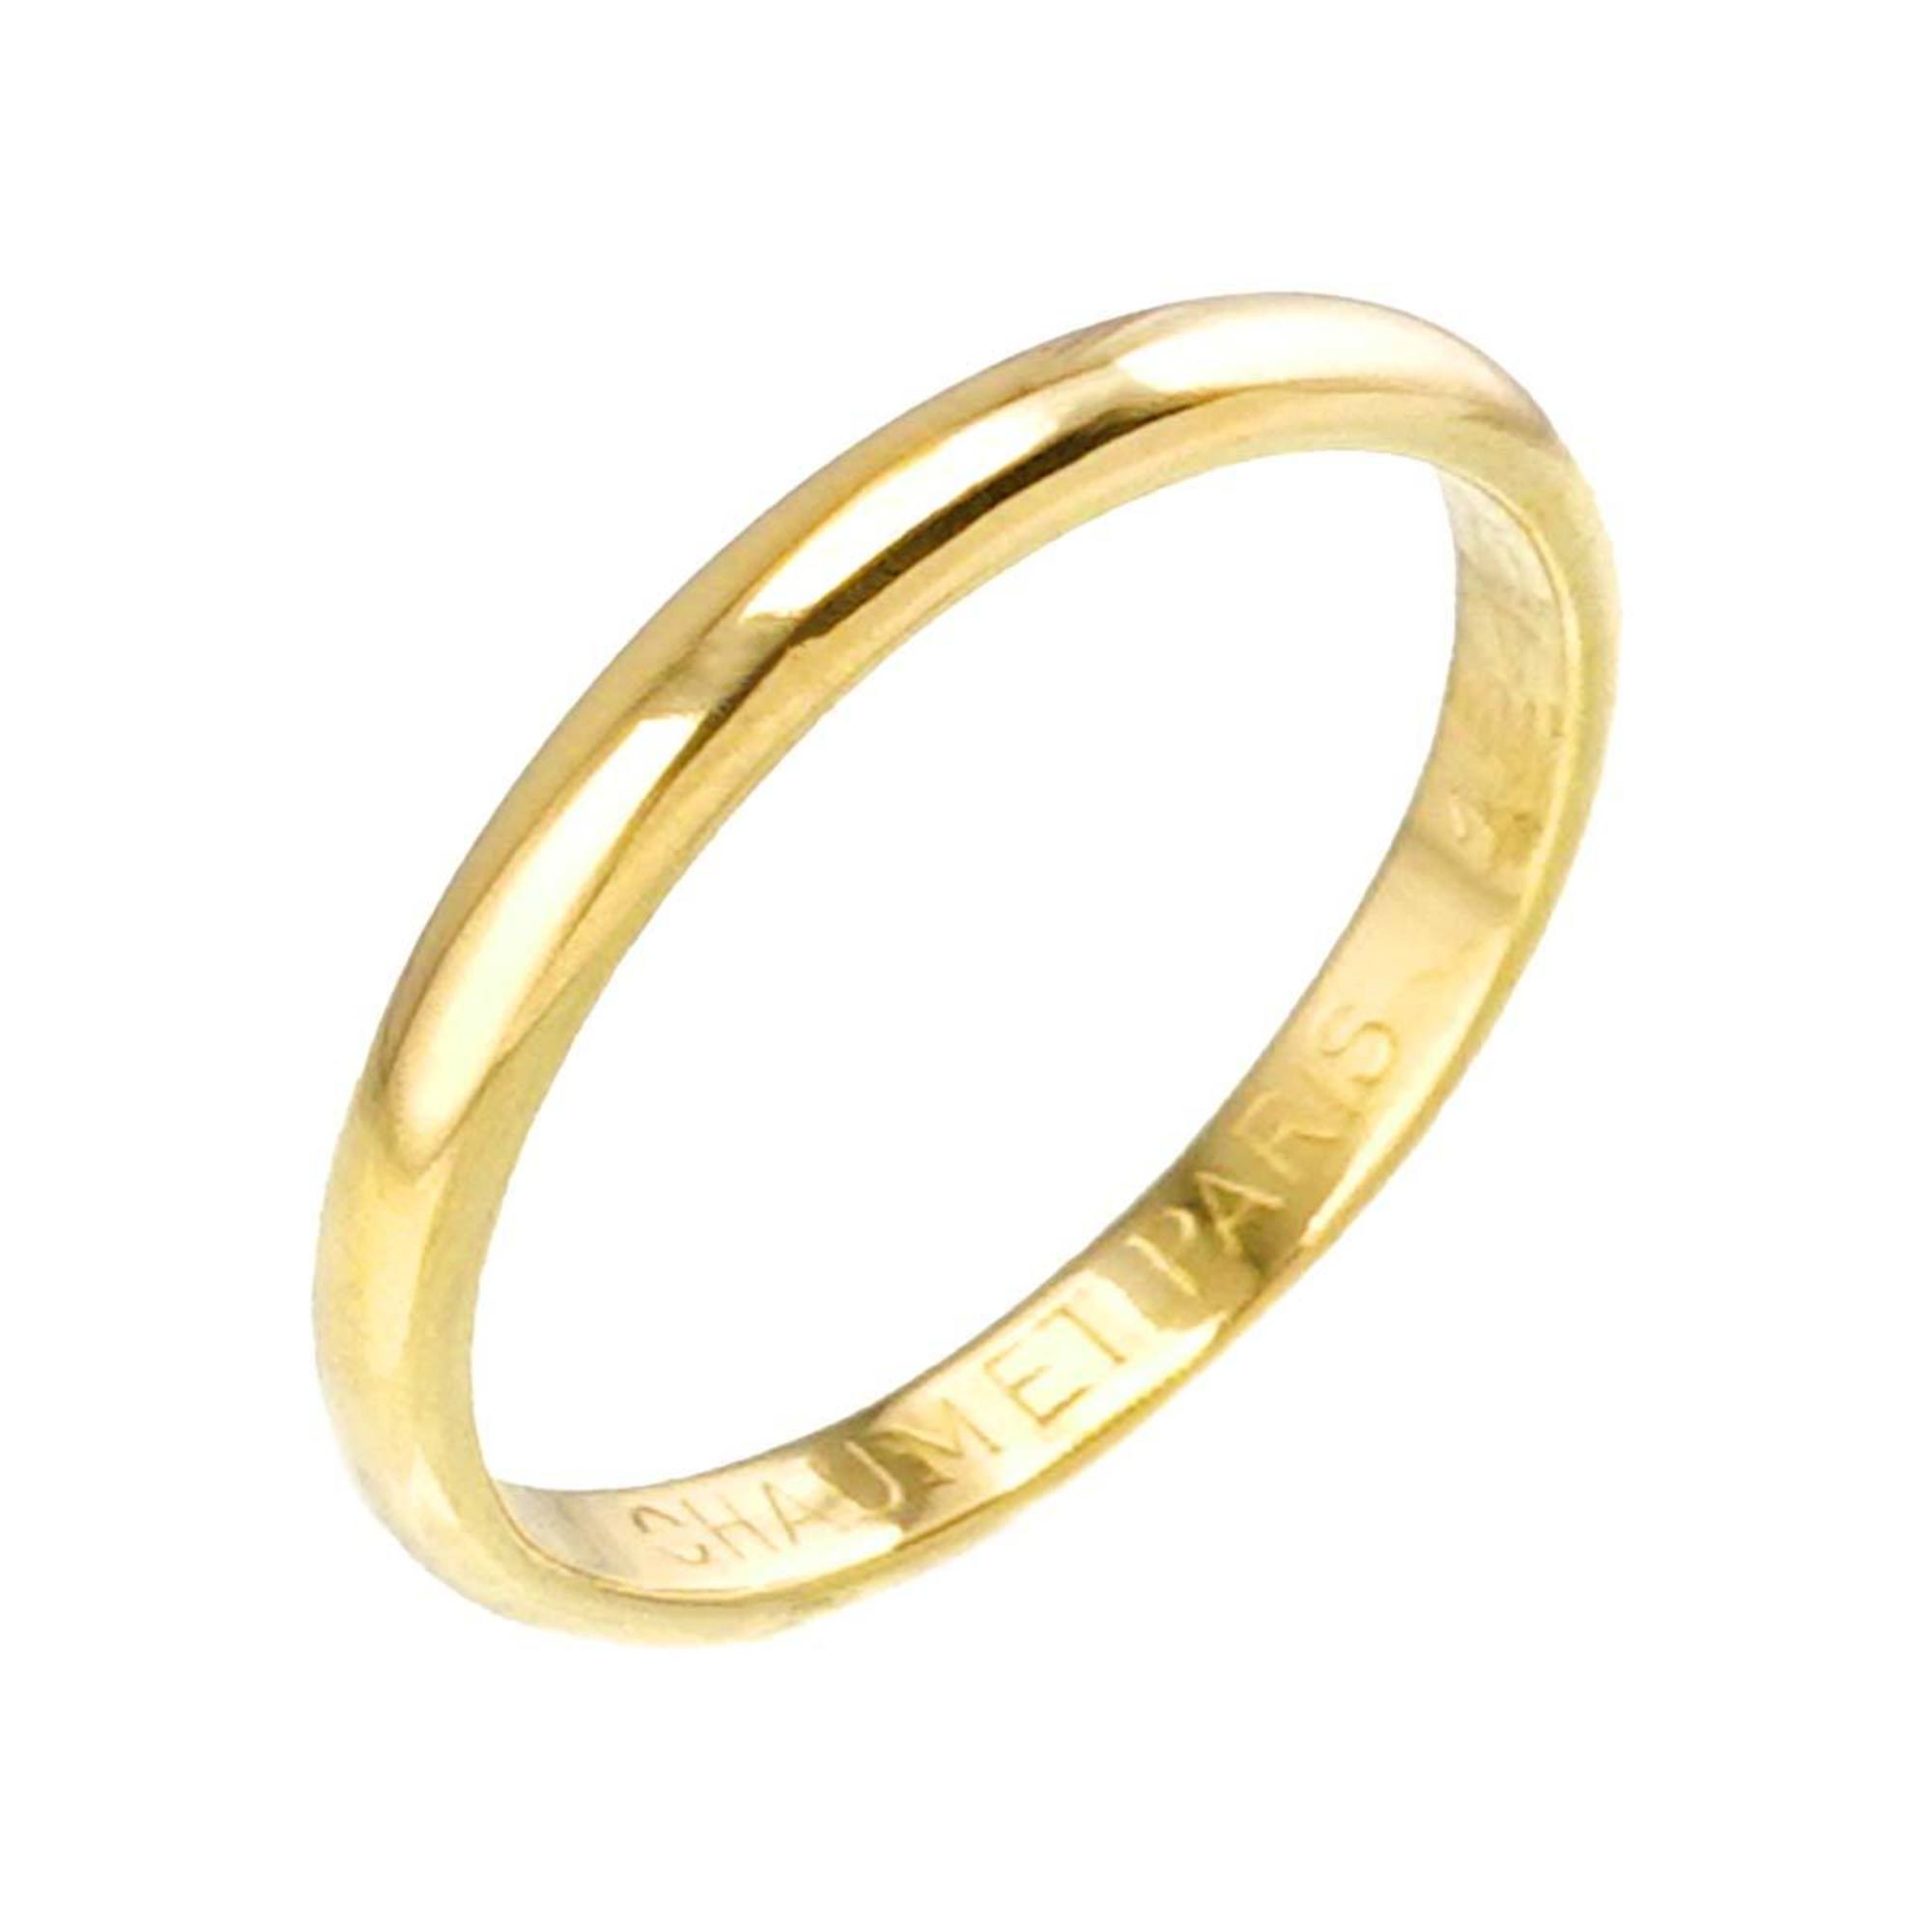 CHAUMET Plain Ring Size 8 K18 Yellow Gold 750